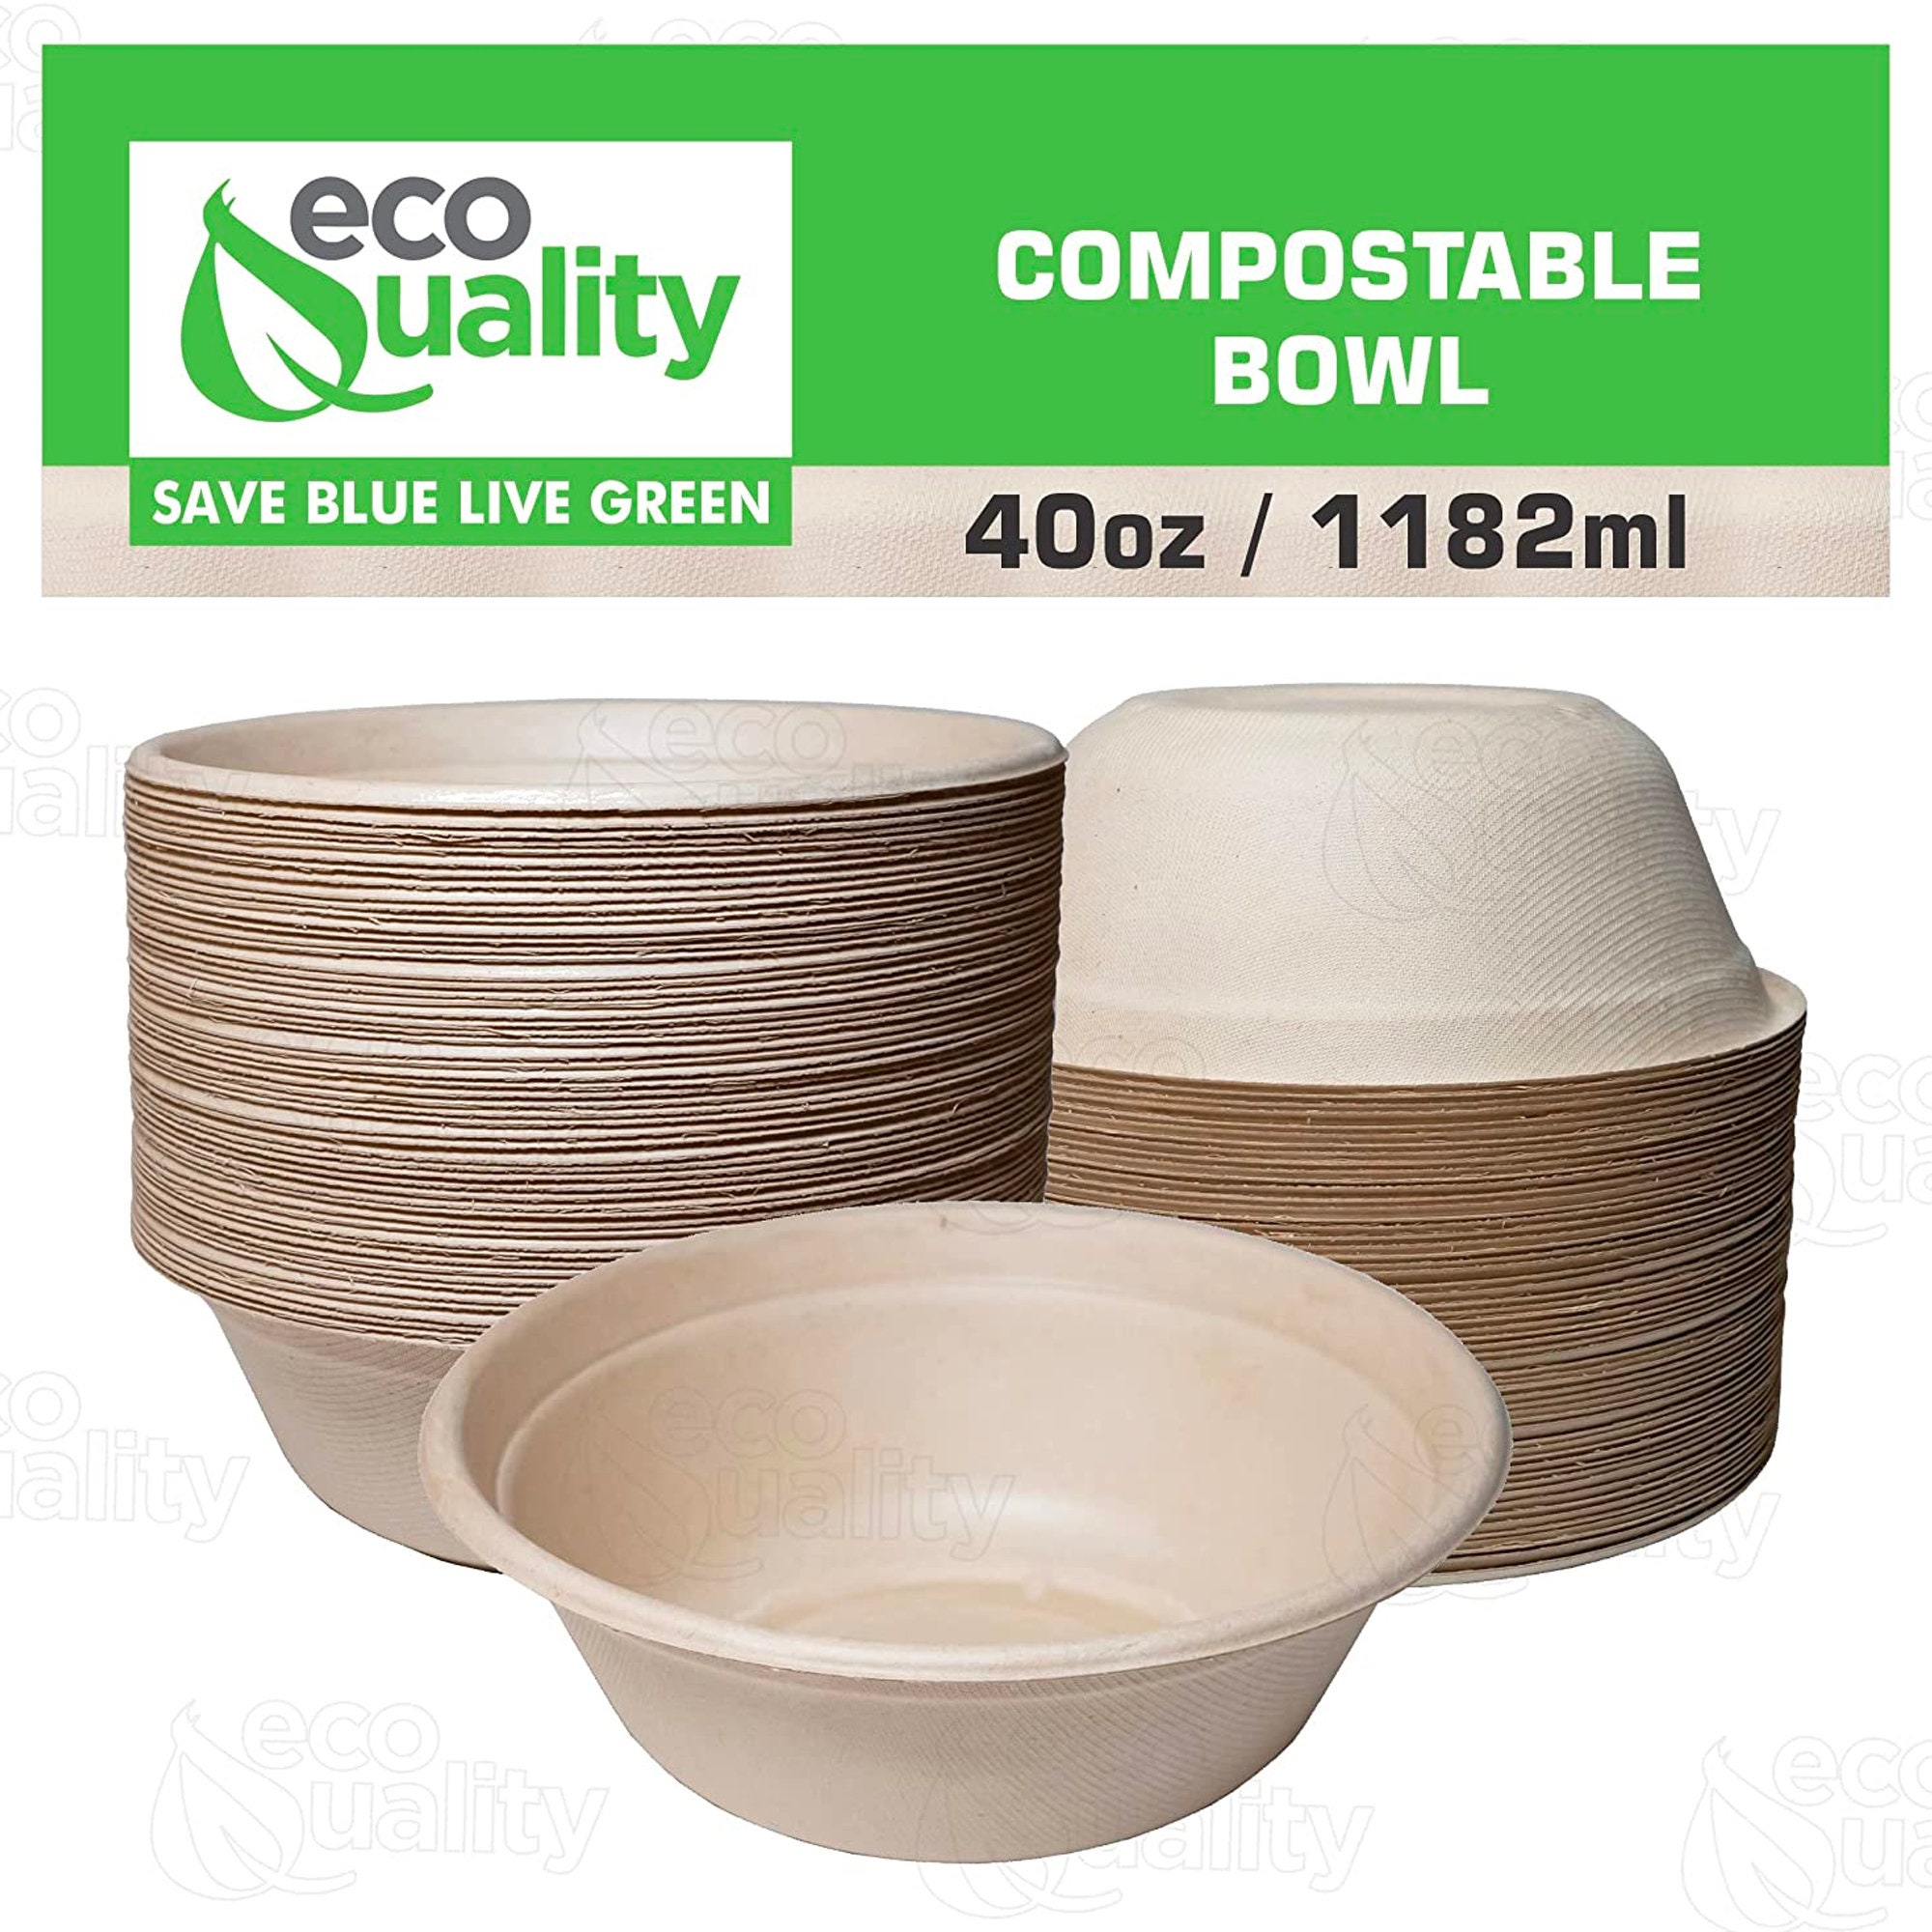 EcoQuality 24oz Disposable Bowls with Clear Lids - Rectangular Compostable Sugarcane Fiber Biodegradable Paper Bowls Eco-Friendly Take Out Food